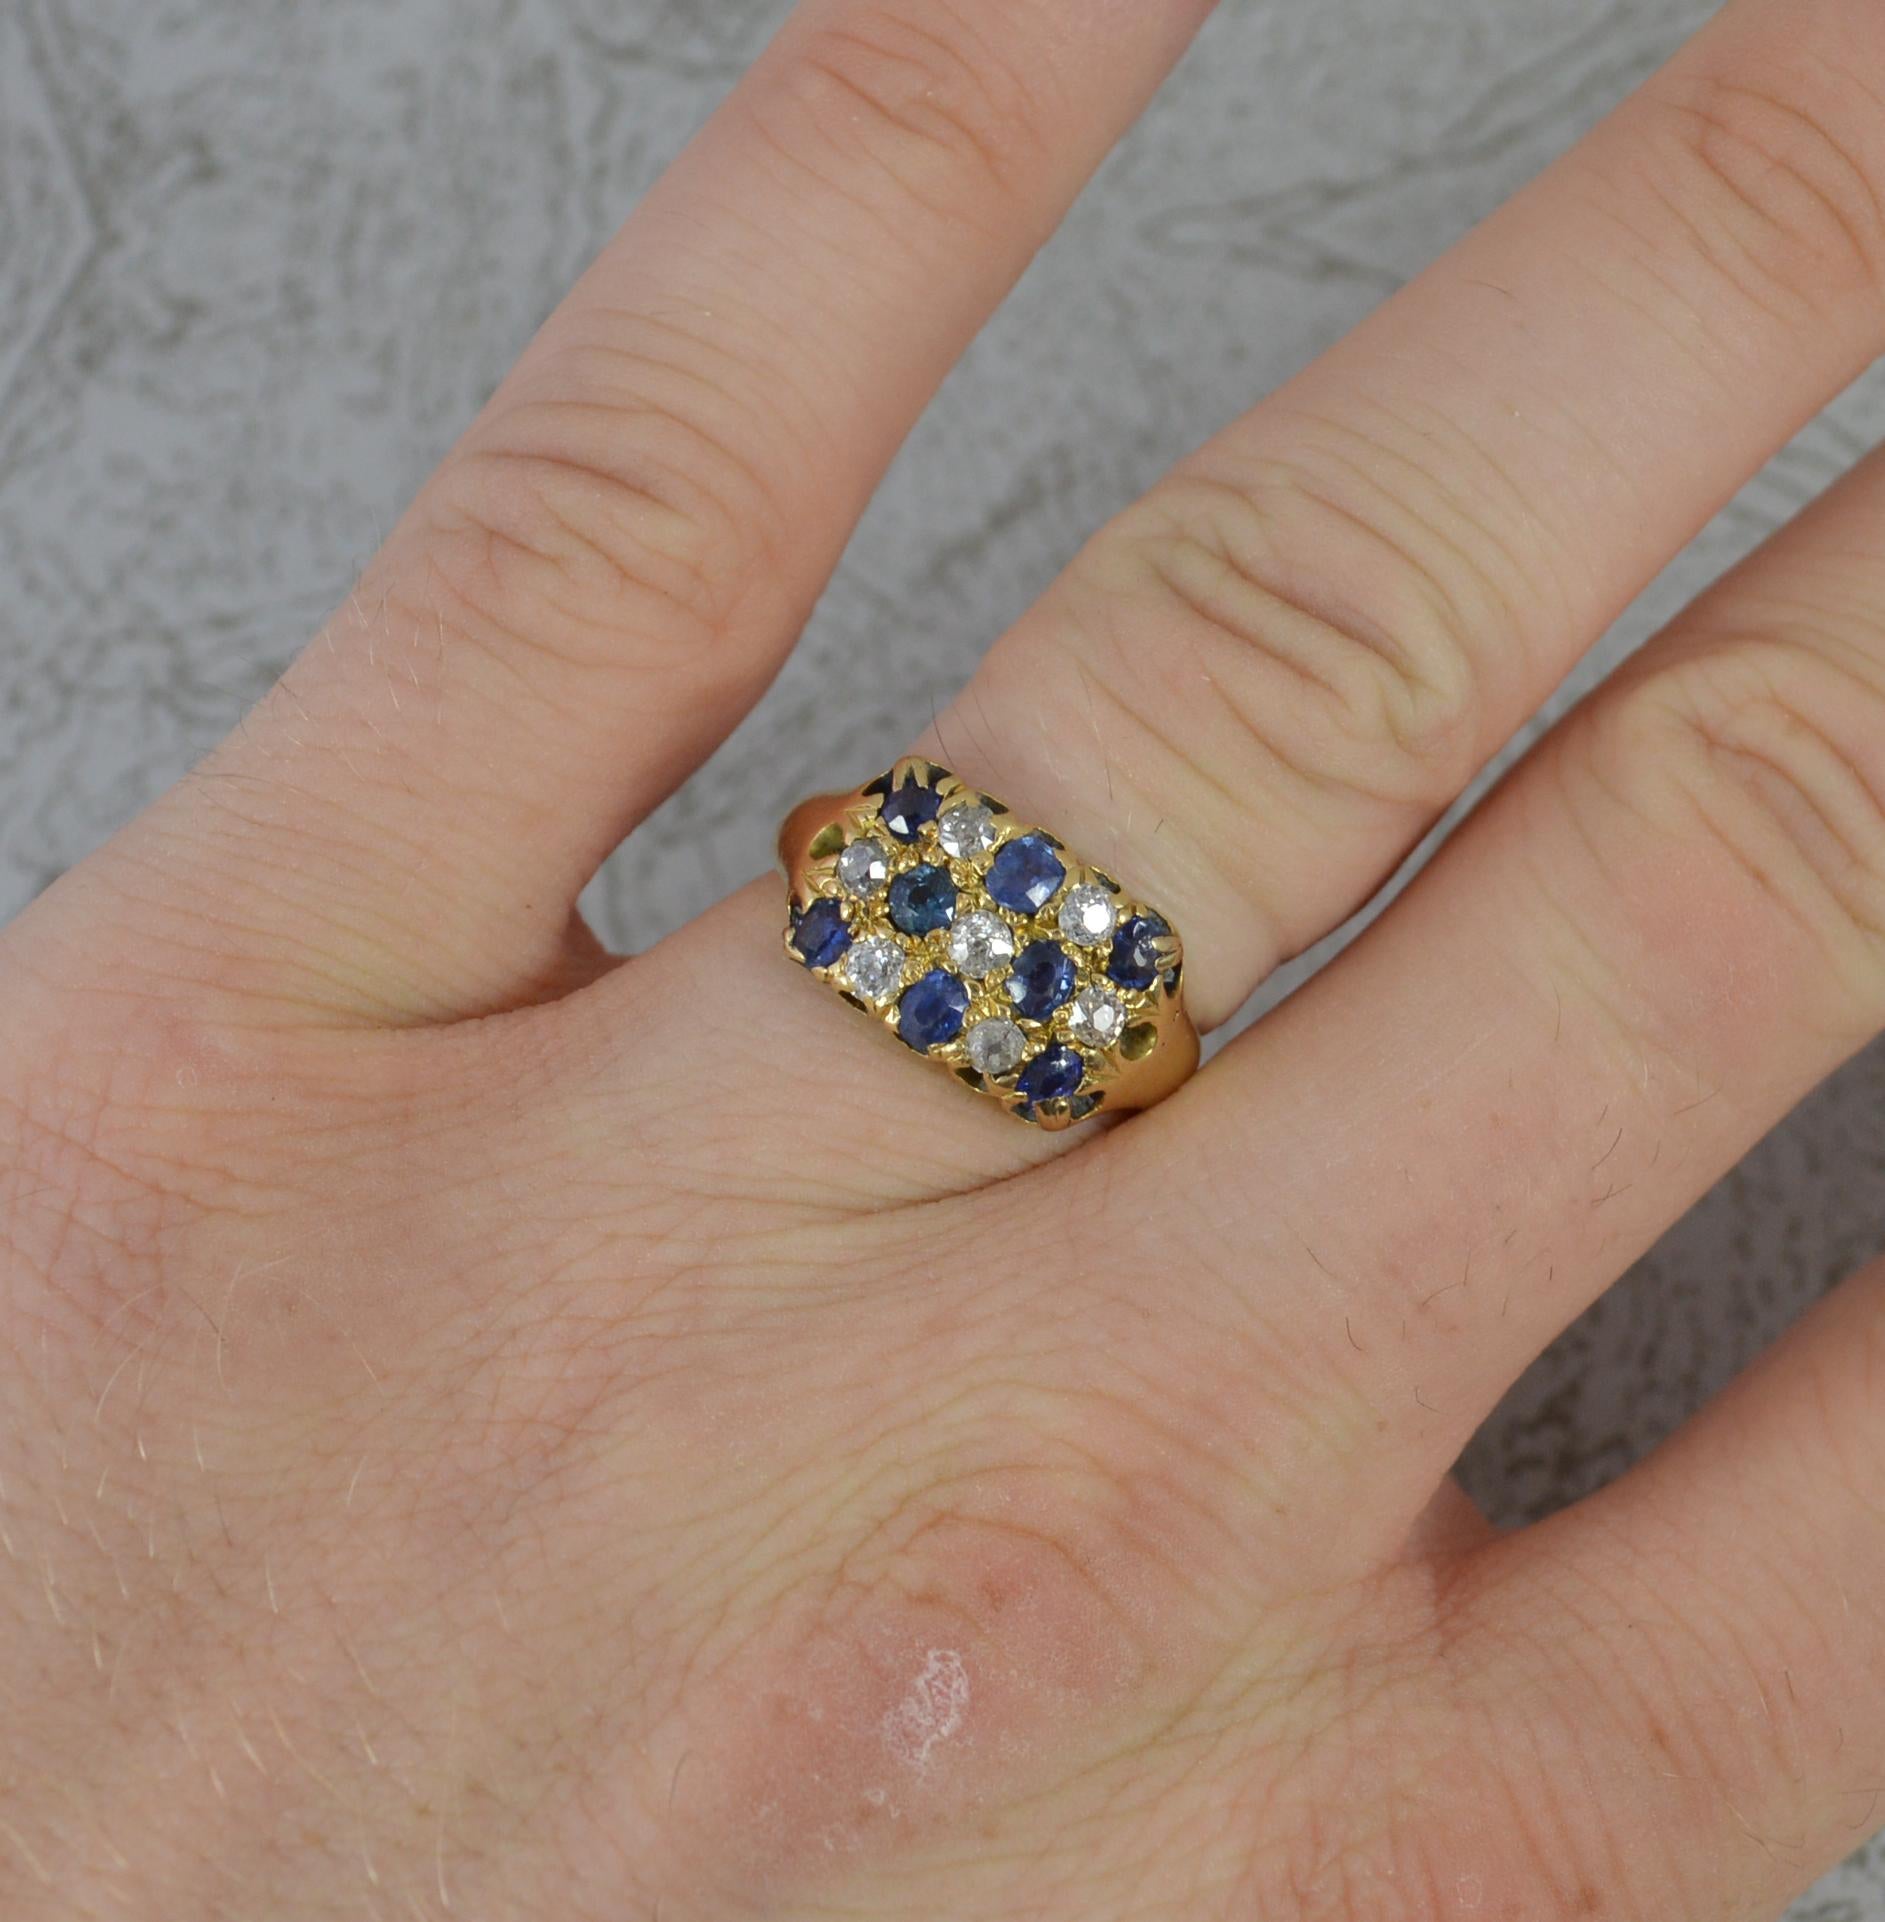 A superb and rare chequerboard design cluster ring.
Solid 18 carat yellow gold example.
Designed as a 5x3 row of alternating old cut diamonds and sapphires, all natural.
14mm x 10mm cluster head.

CONDITION ; Good for age. Clean, solid band. Well